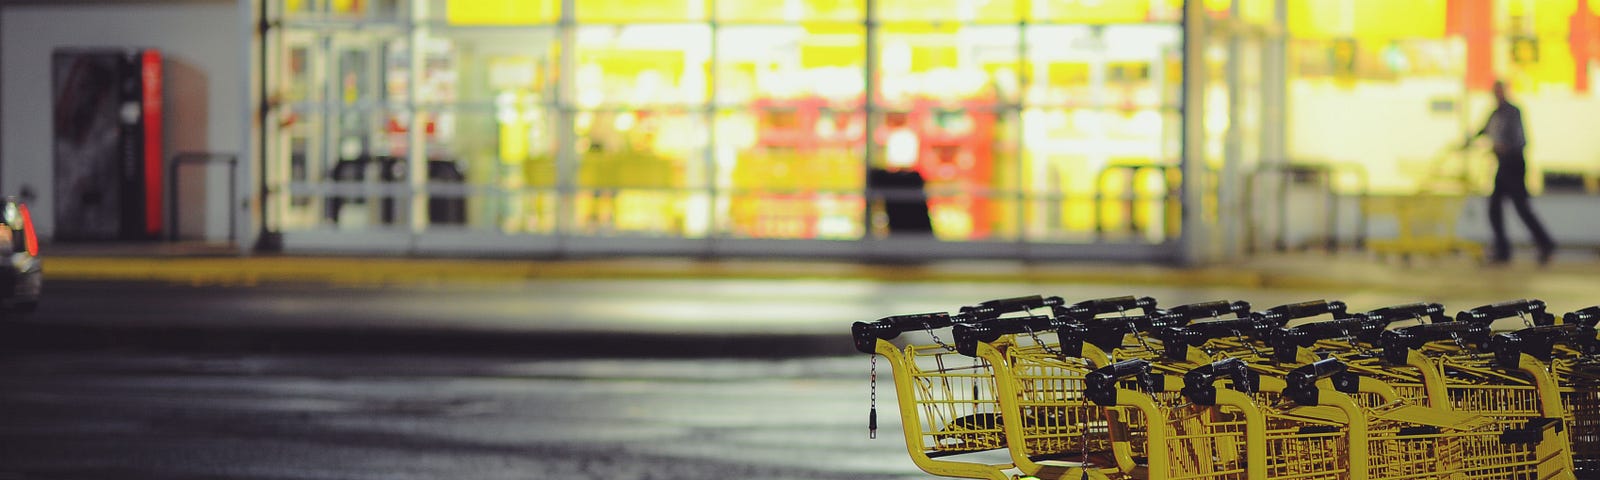 Yellow shopping carts outside a grocery store